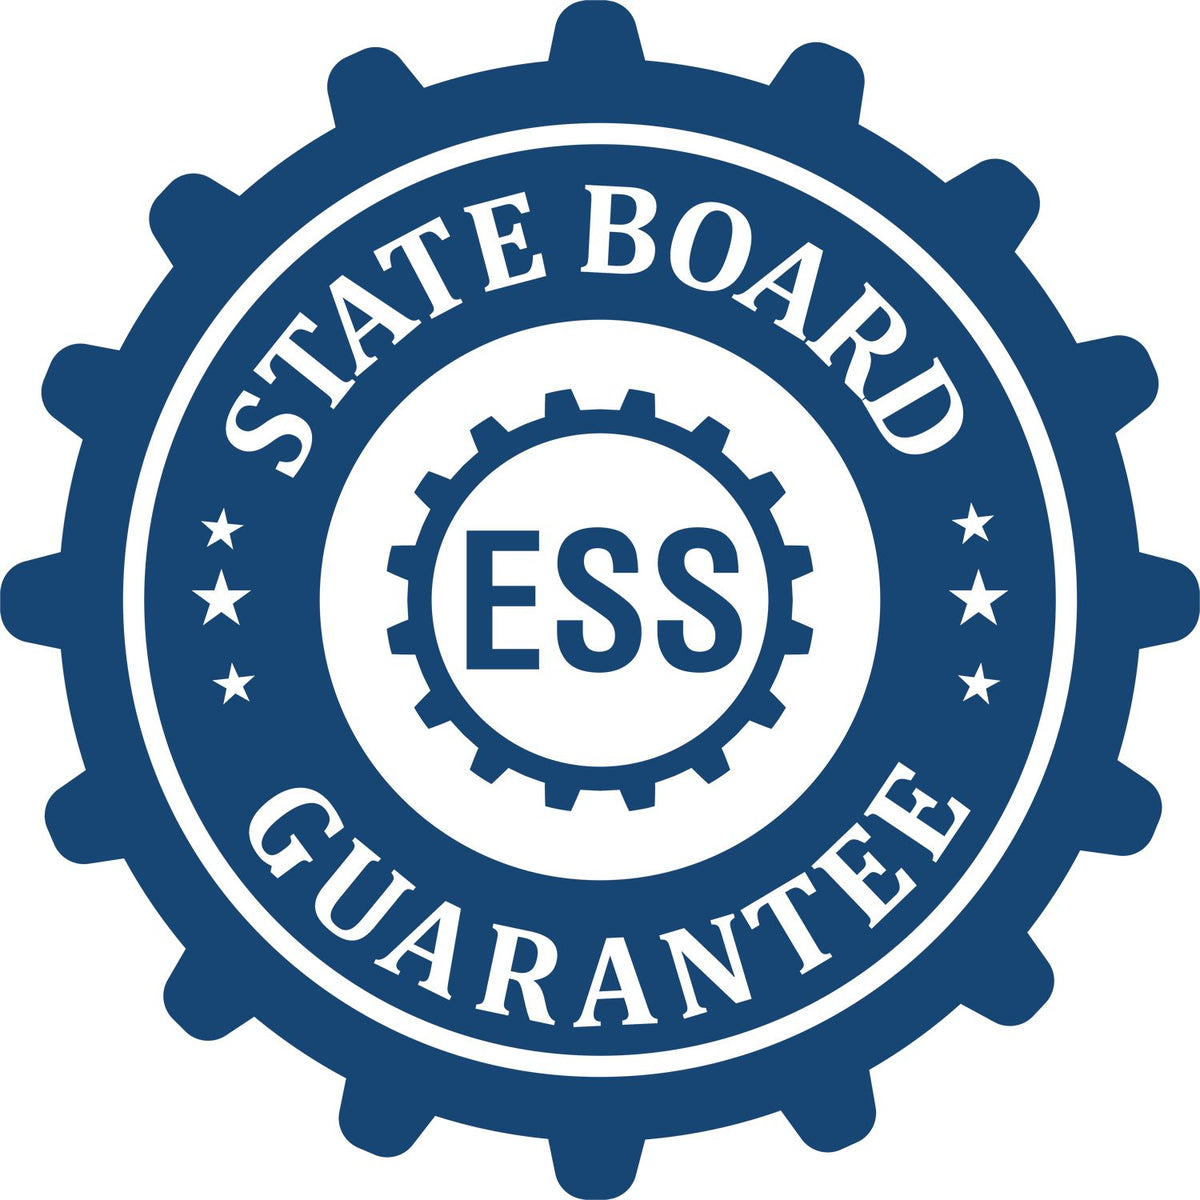 An emblem in a gear shape illustrating a state board guarantee for the Hybrid Ohio Geologist Seal